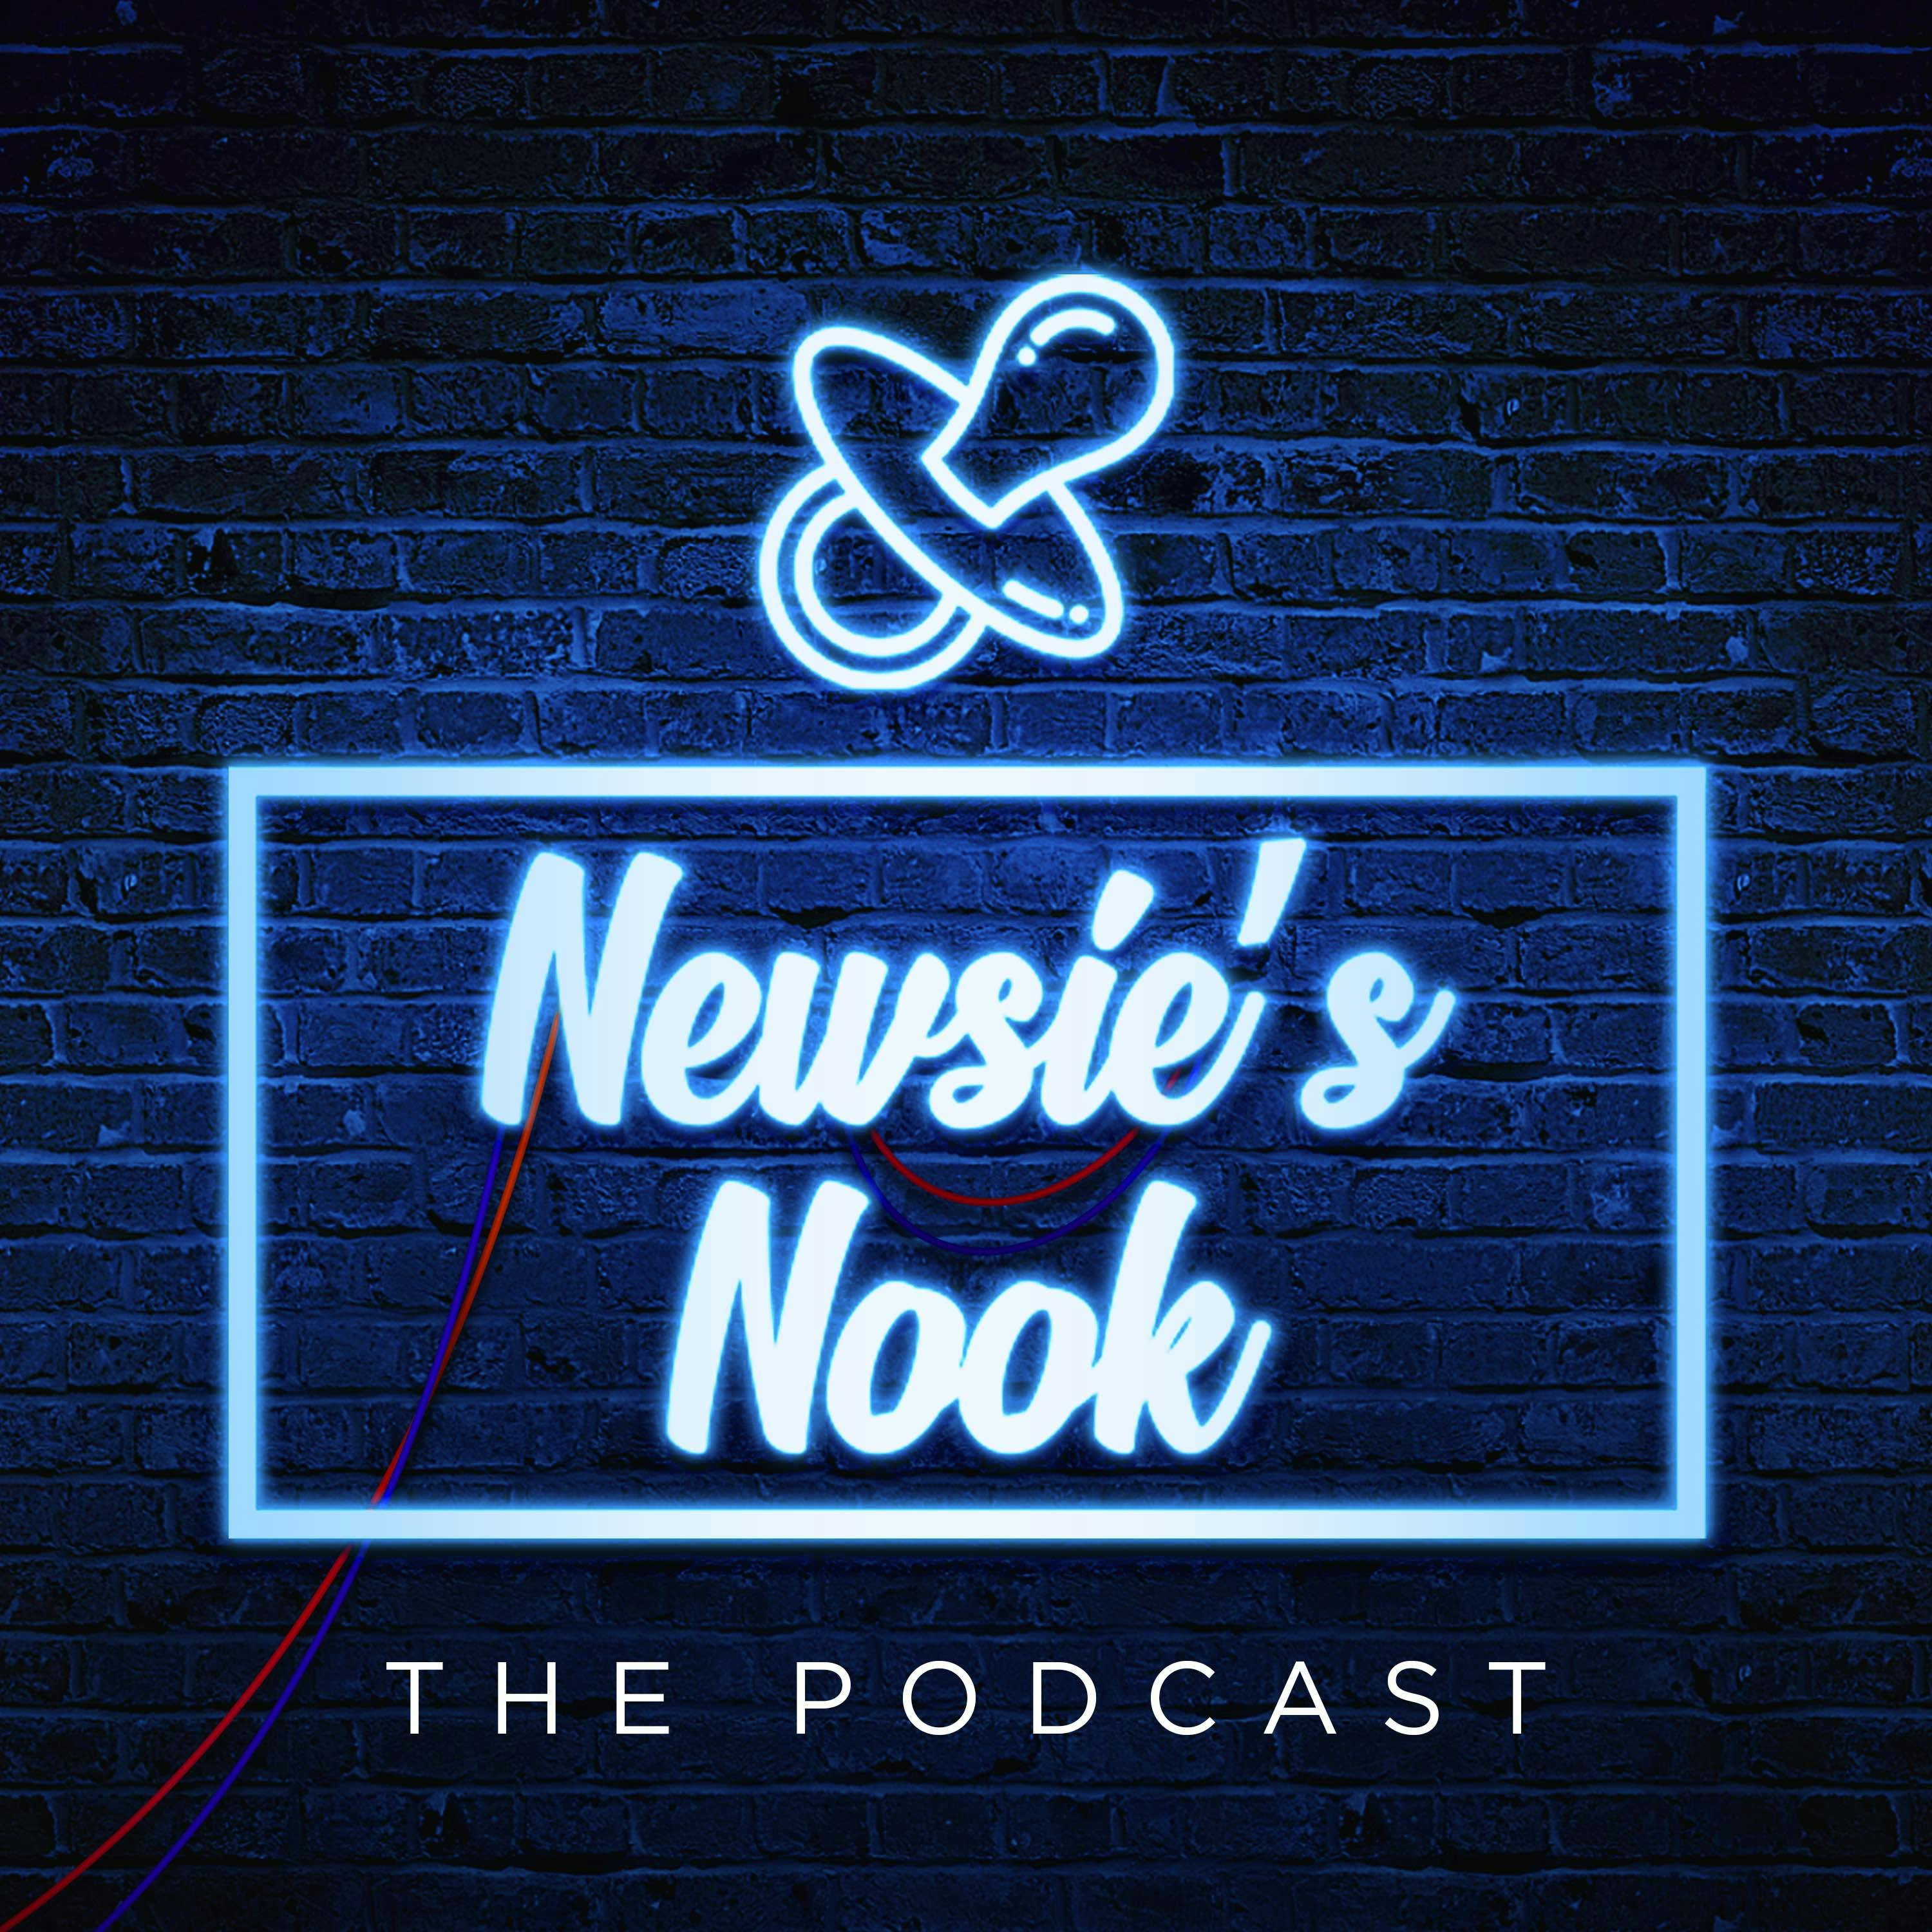 Newsies Nook Podcast Cover Art